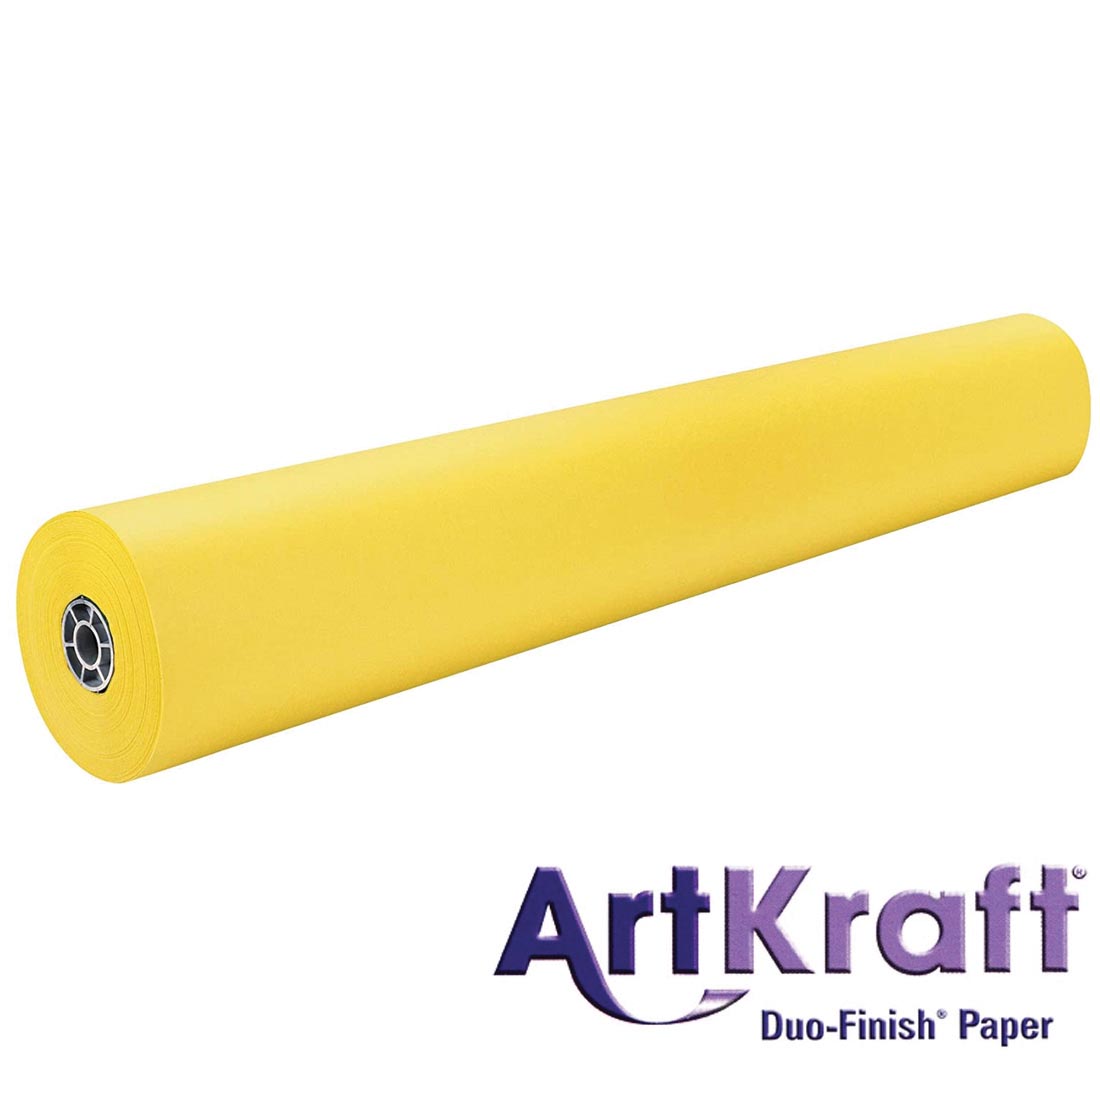 Roll of Canary Paper with text ArtKraft Duo-Finish Paper